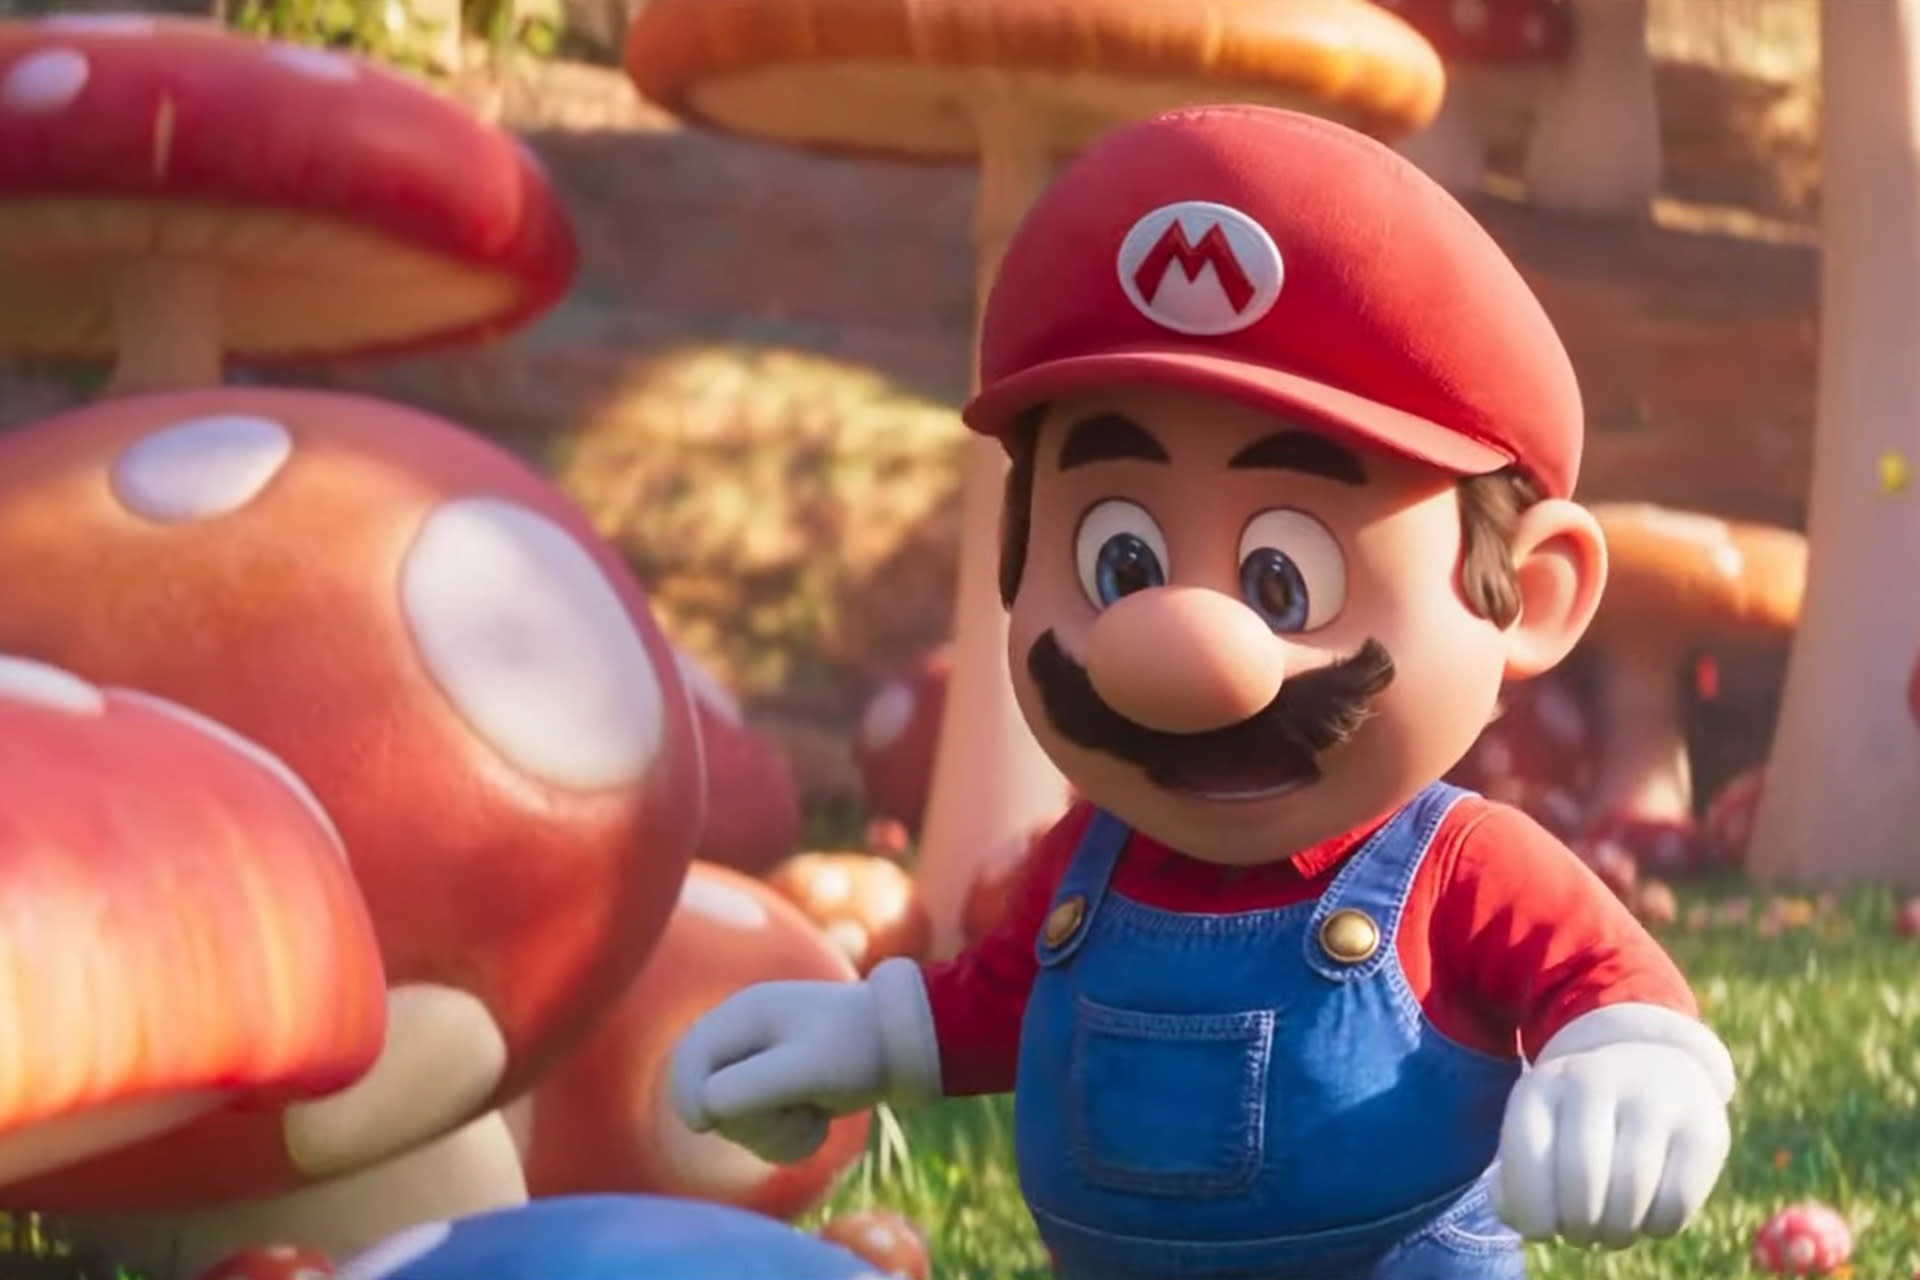 What The Super Mario Bros. Movie gets wrong about the games